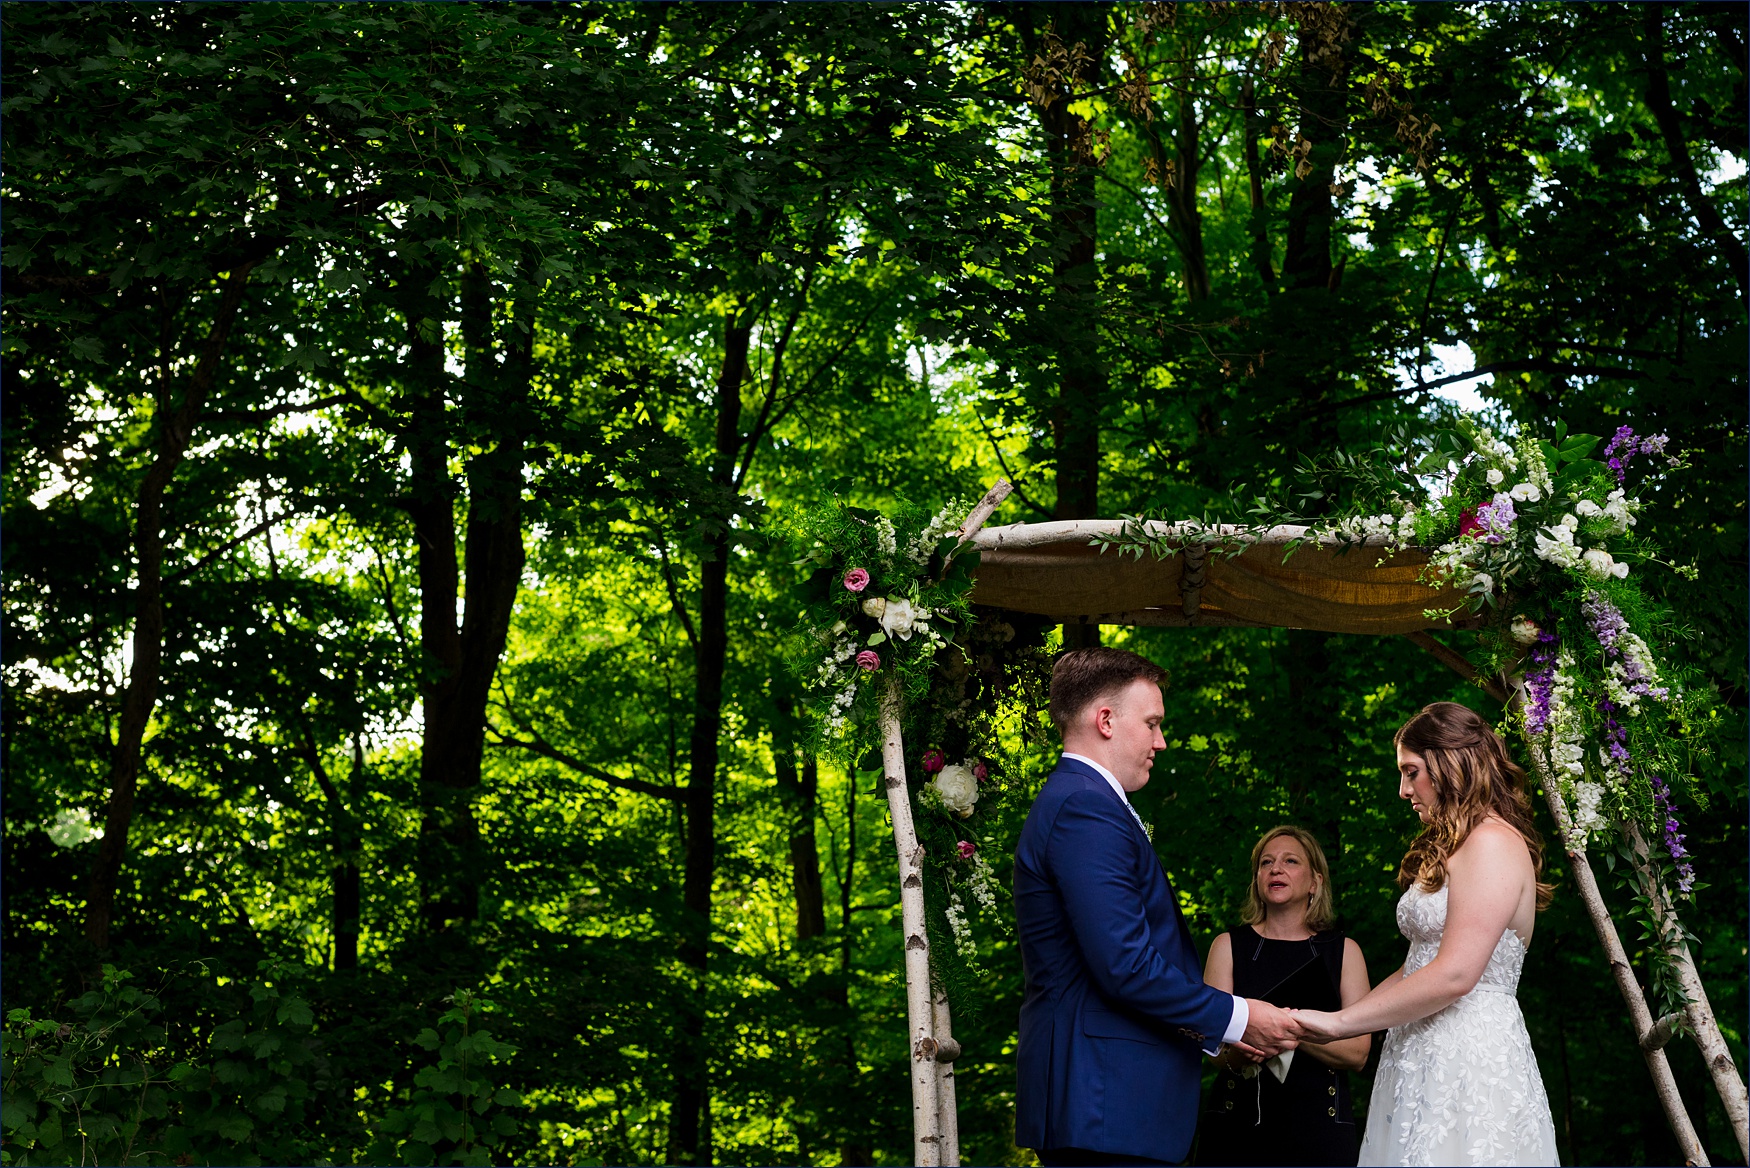 The bride and groom stand among the tall trees on the wedding day